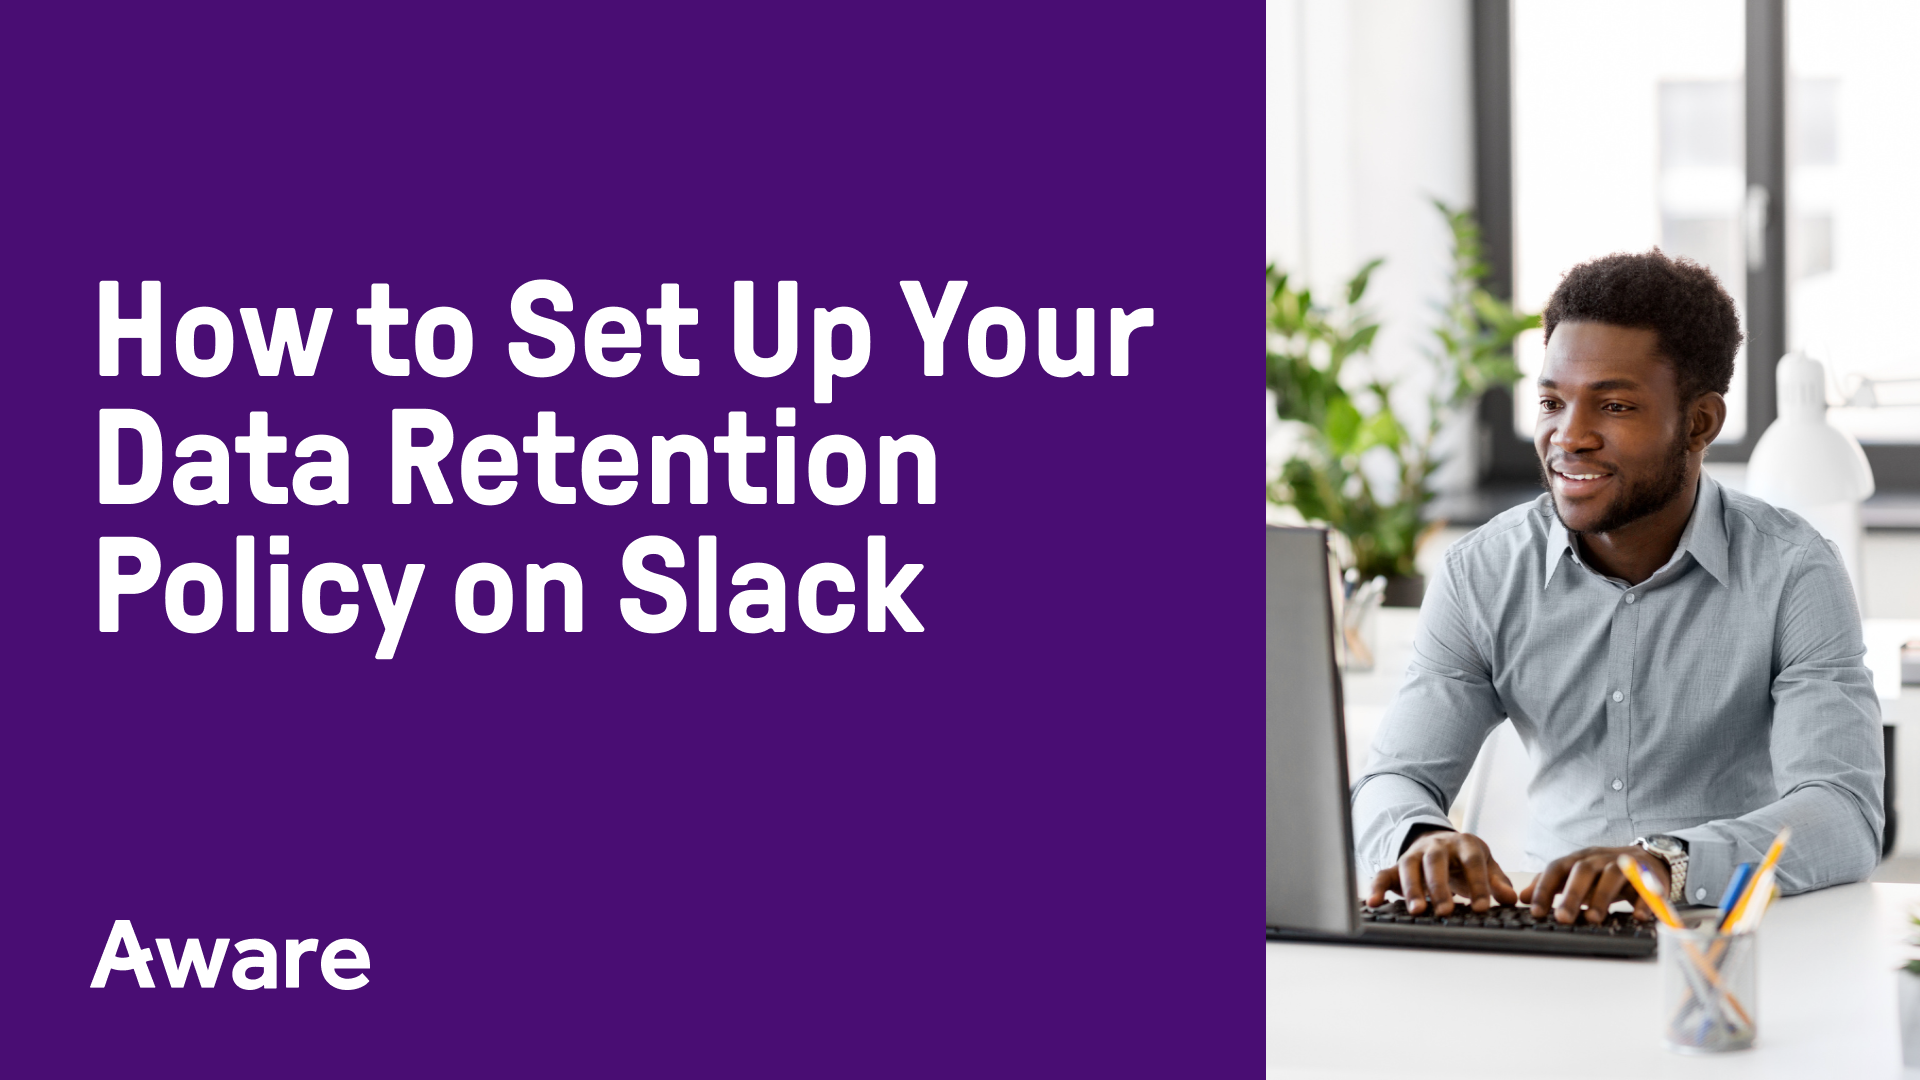 How to Set Up Your Data Retention Policy for Slack